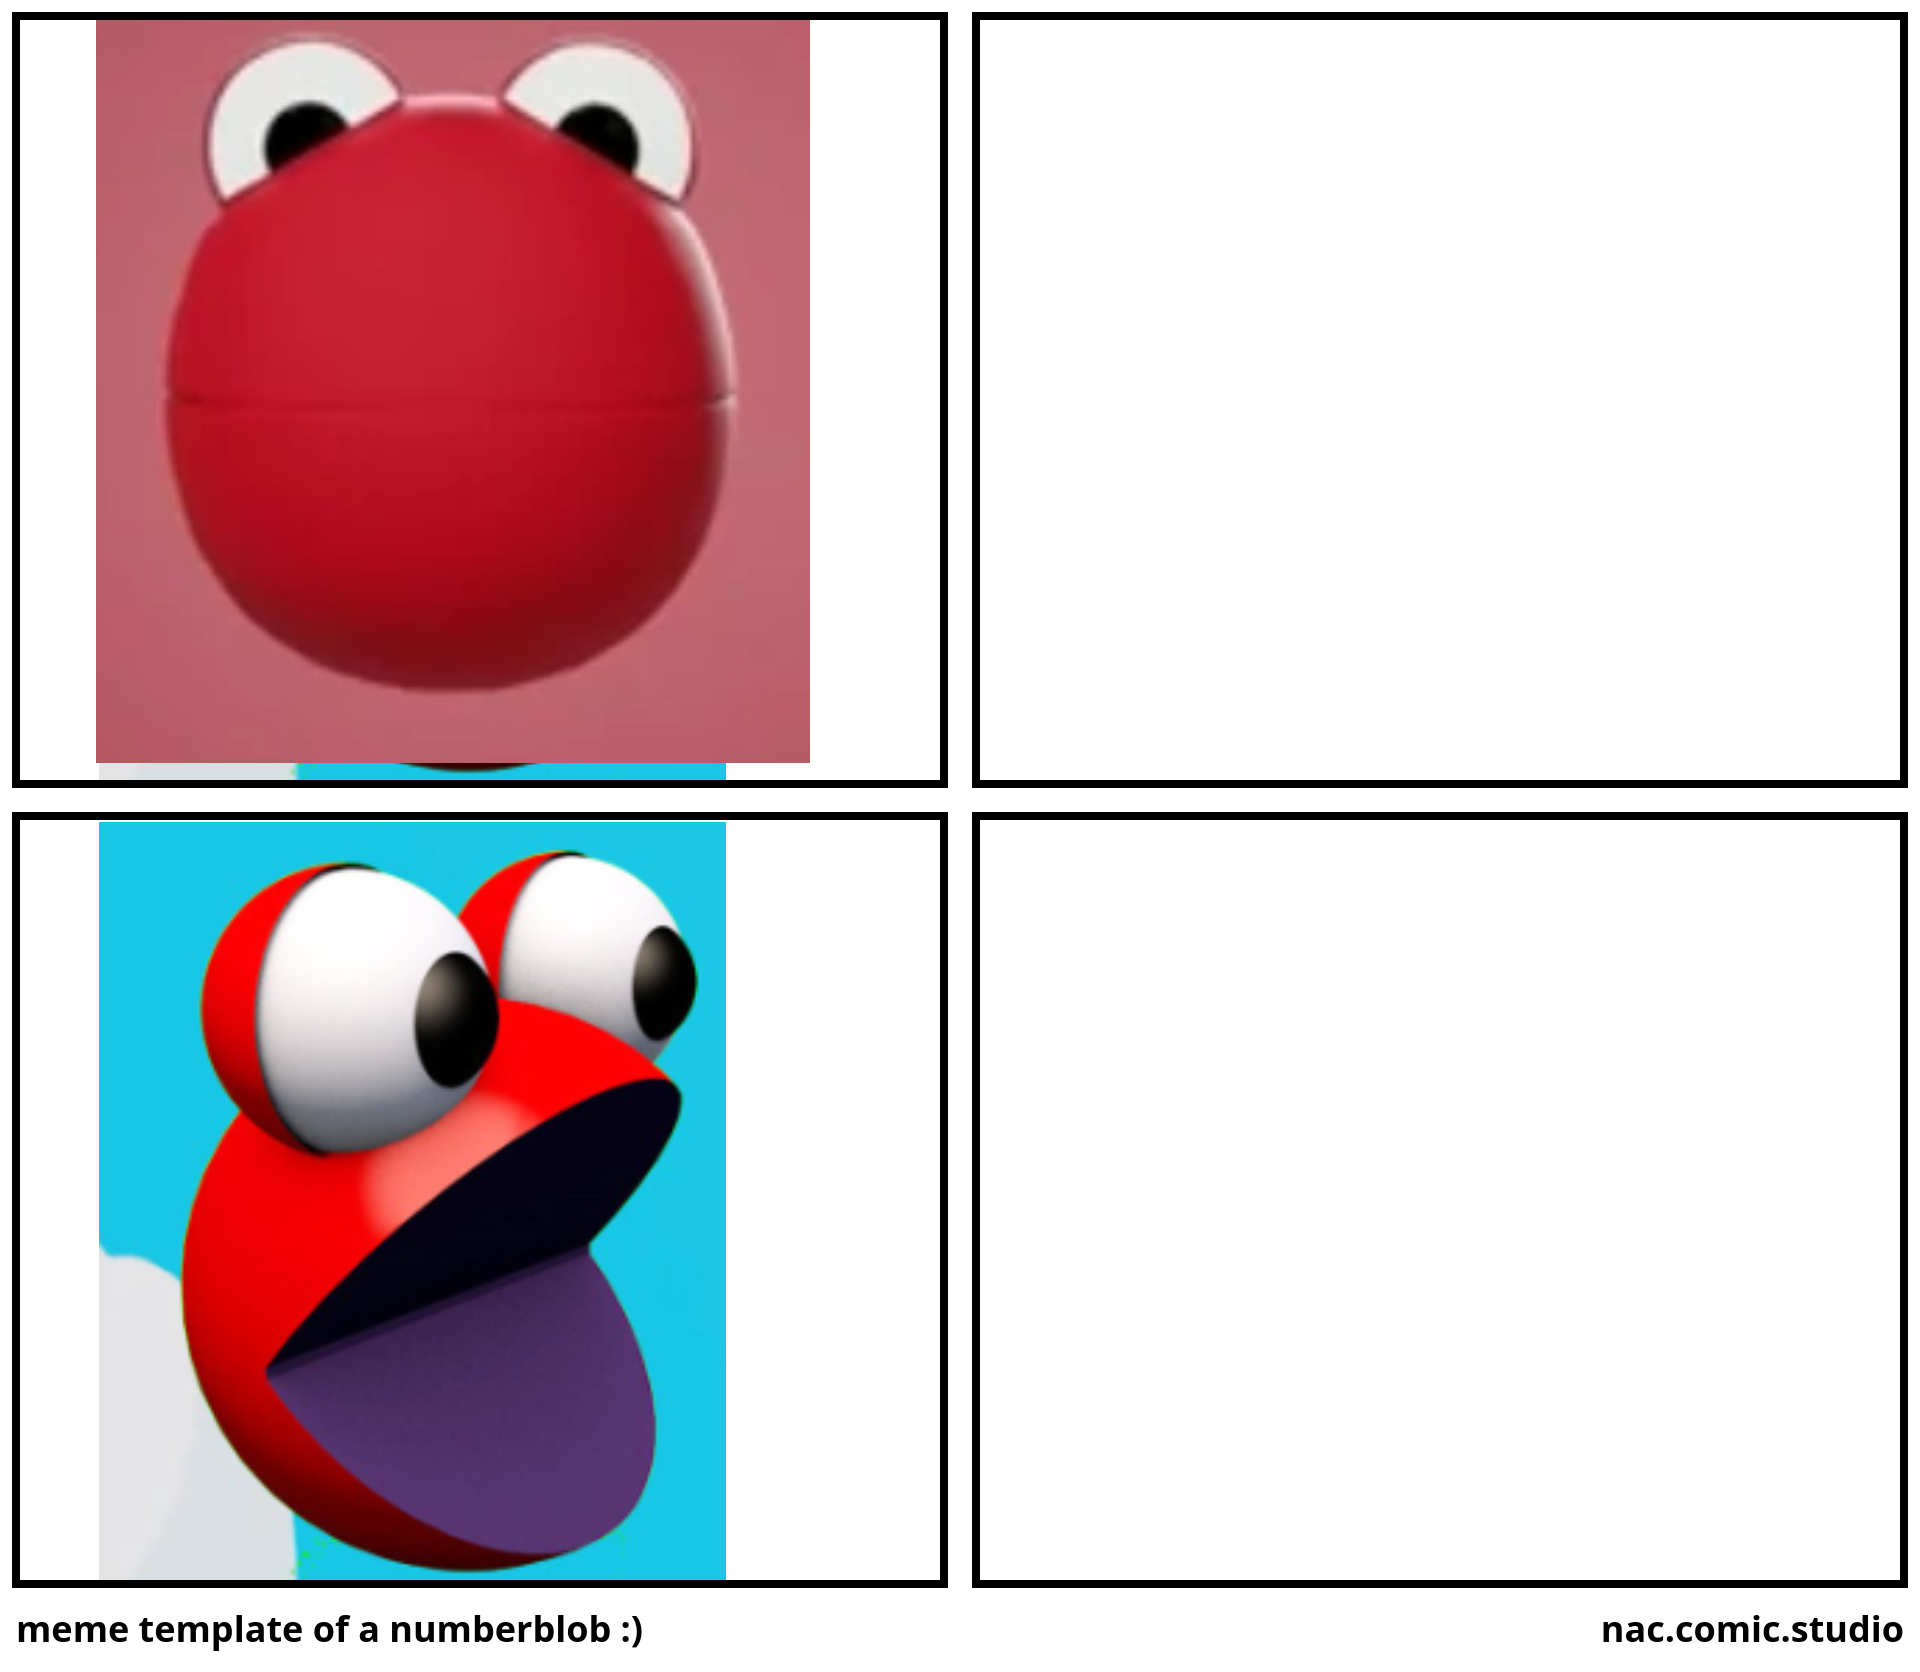 meme template of a numberblob :)